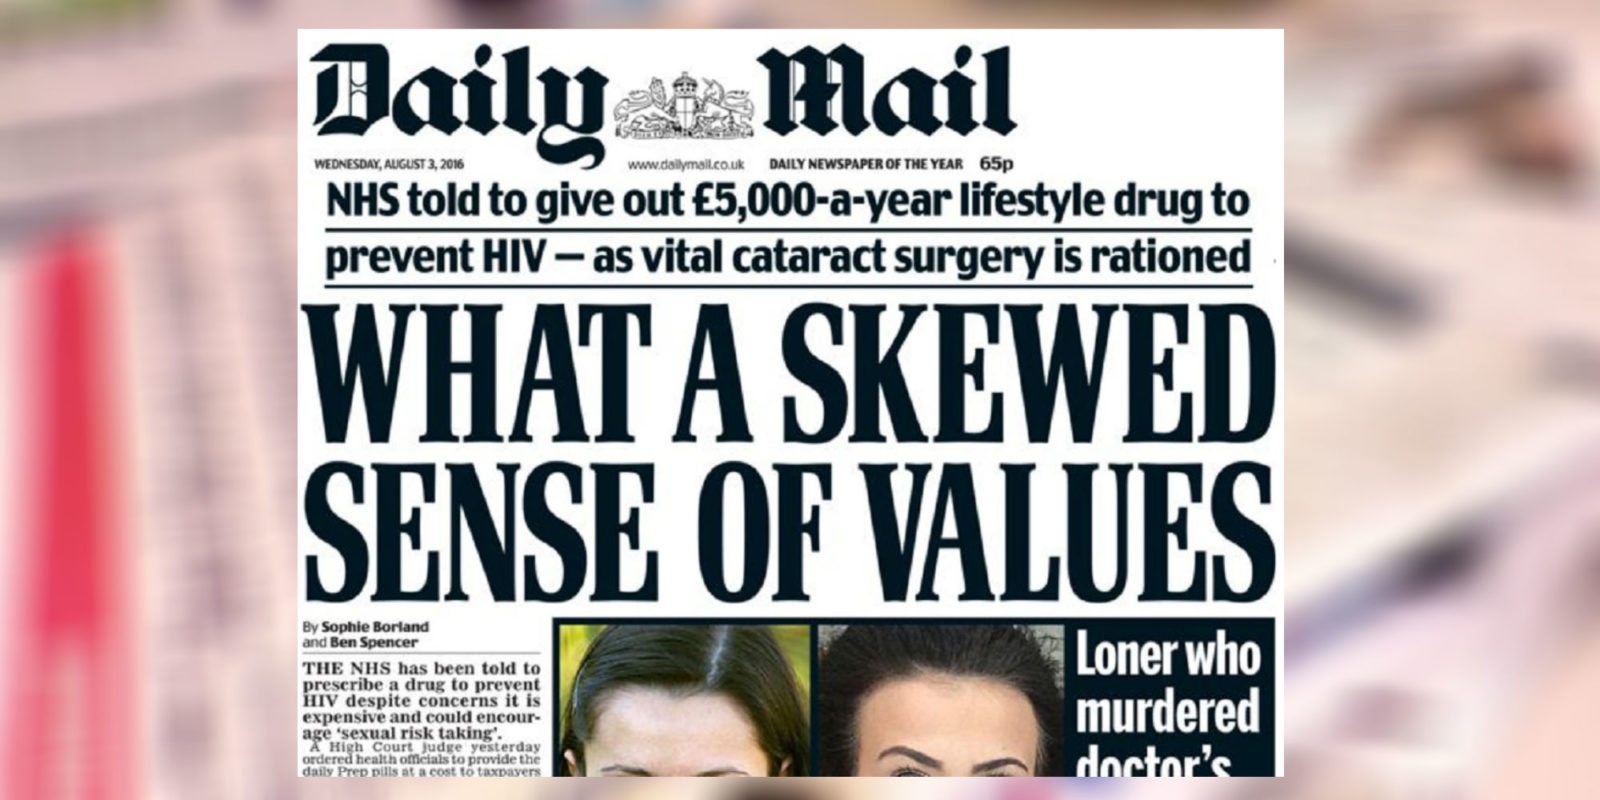 The Daily Mail ran a front-page story attacking PrEP 